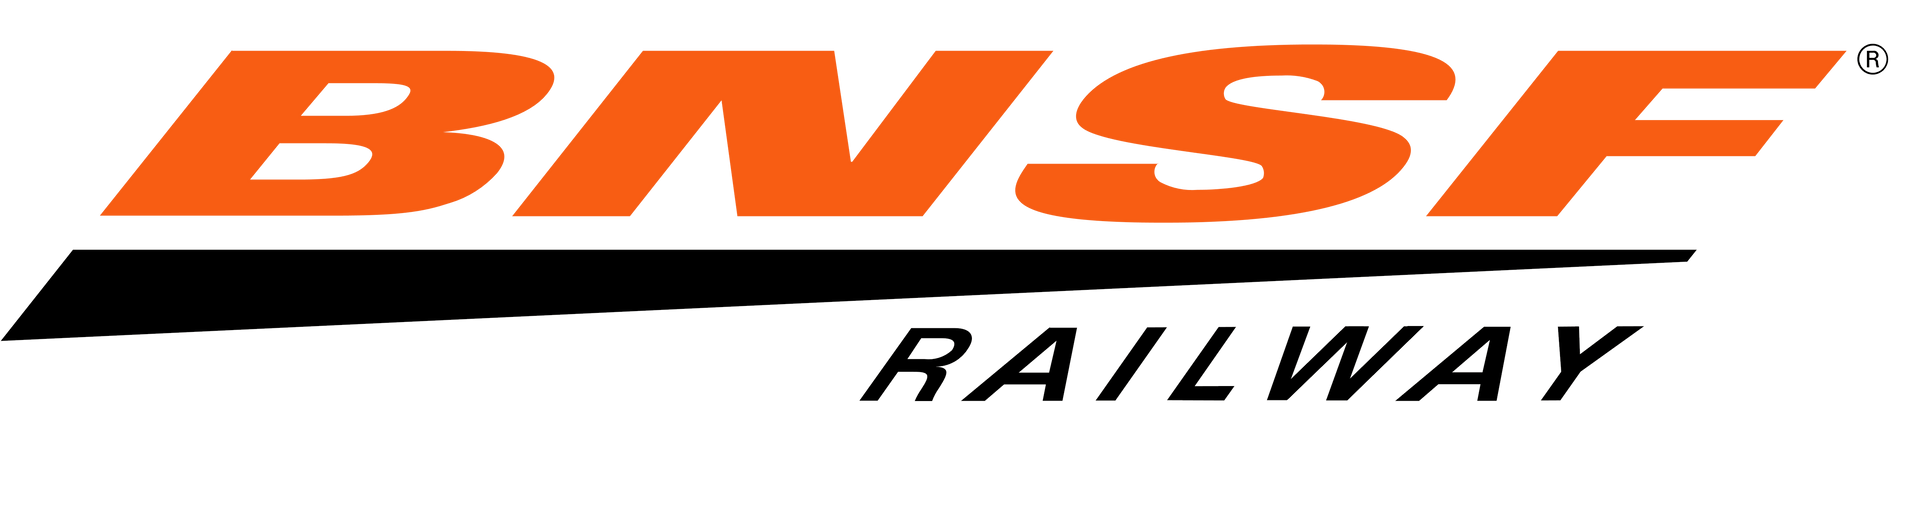 The bnsf railway logo is orange and black on a white background